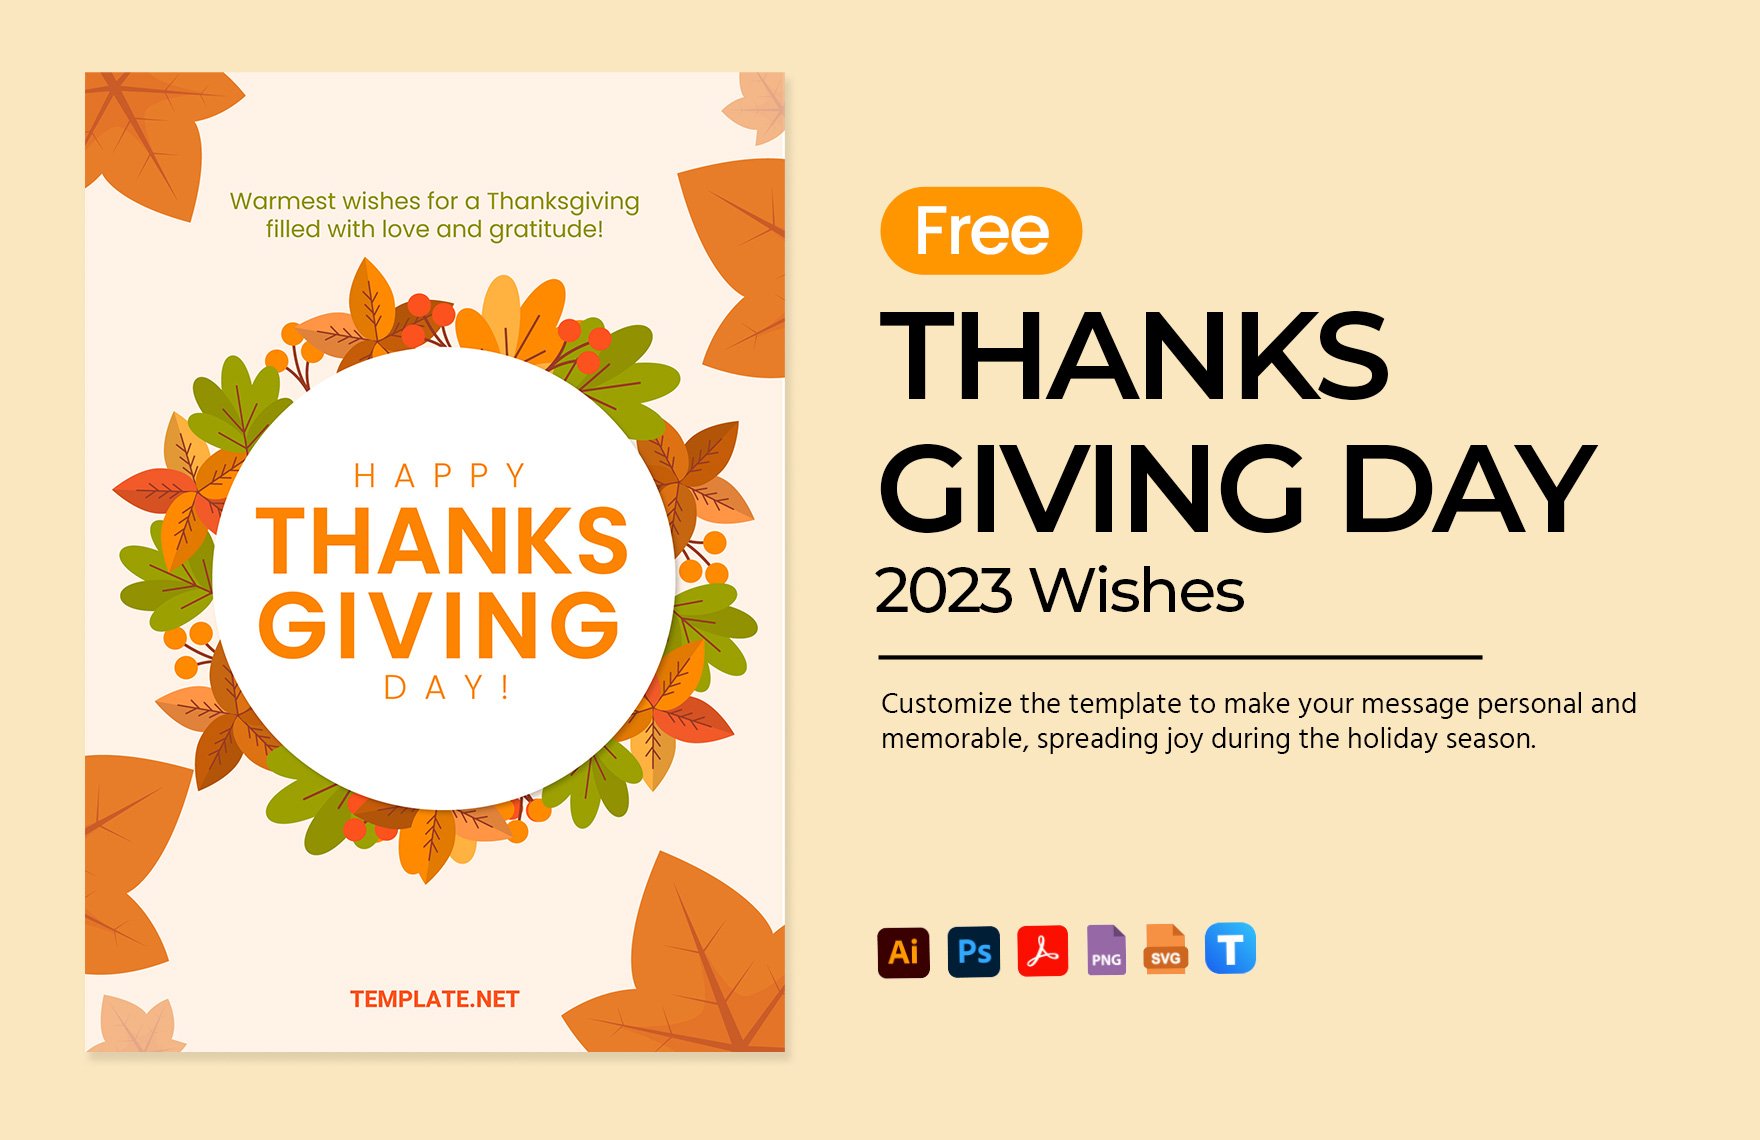 Free Thanksgiving Day 2023 Wishes in PDF, Illustrator, PSD, SVG, PNG